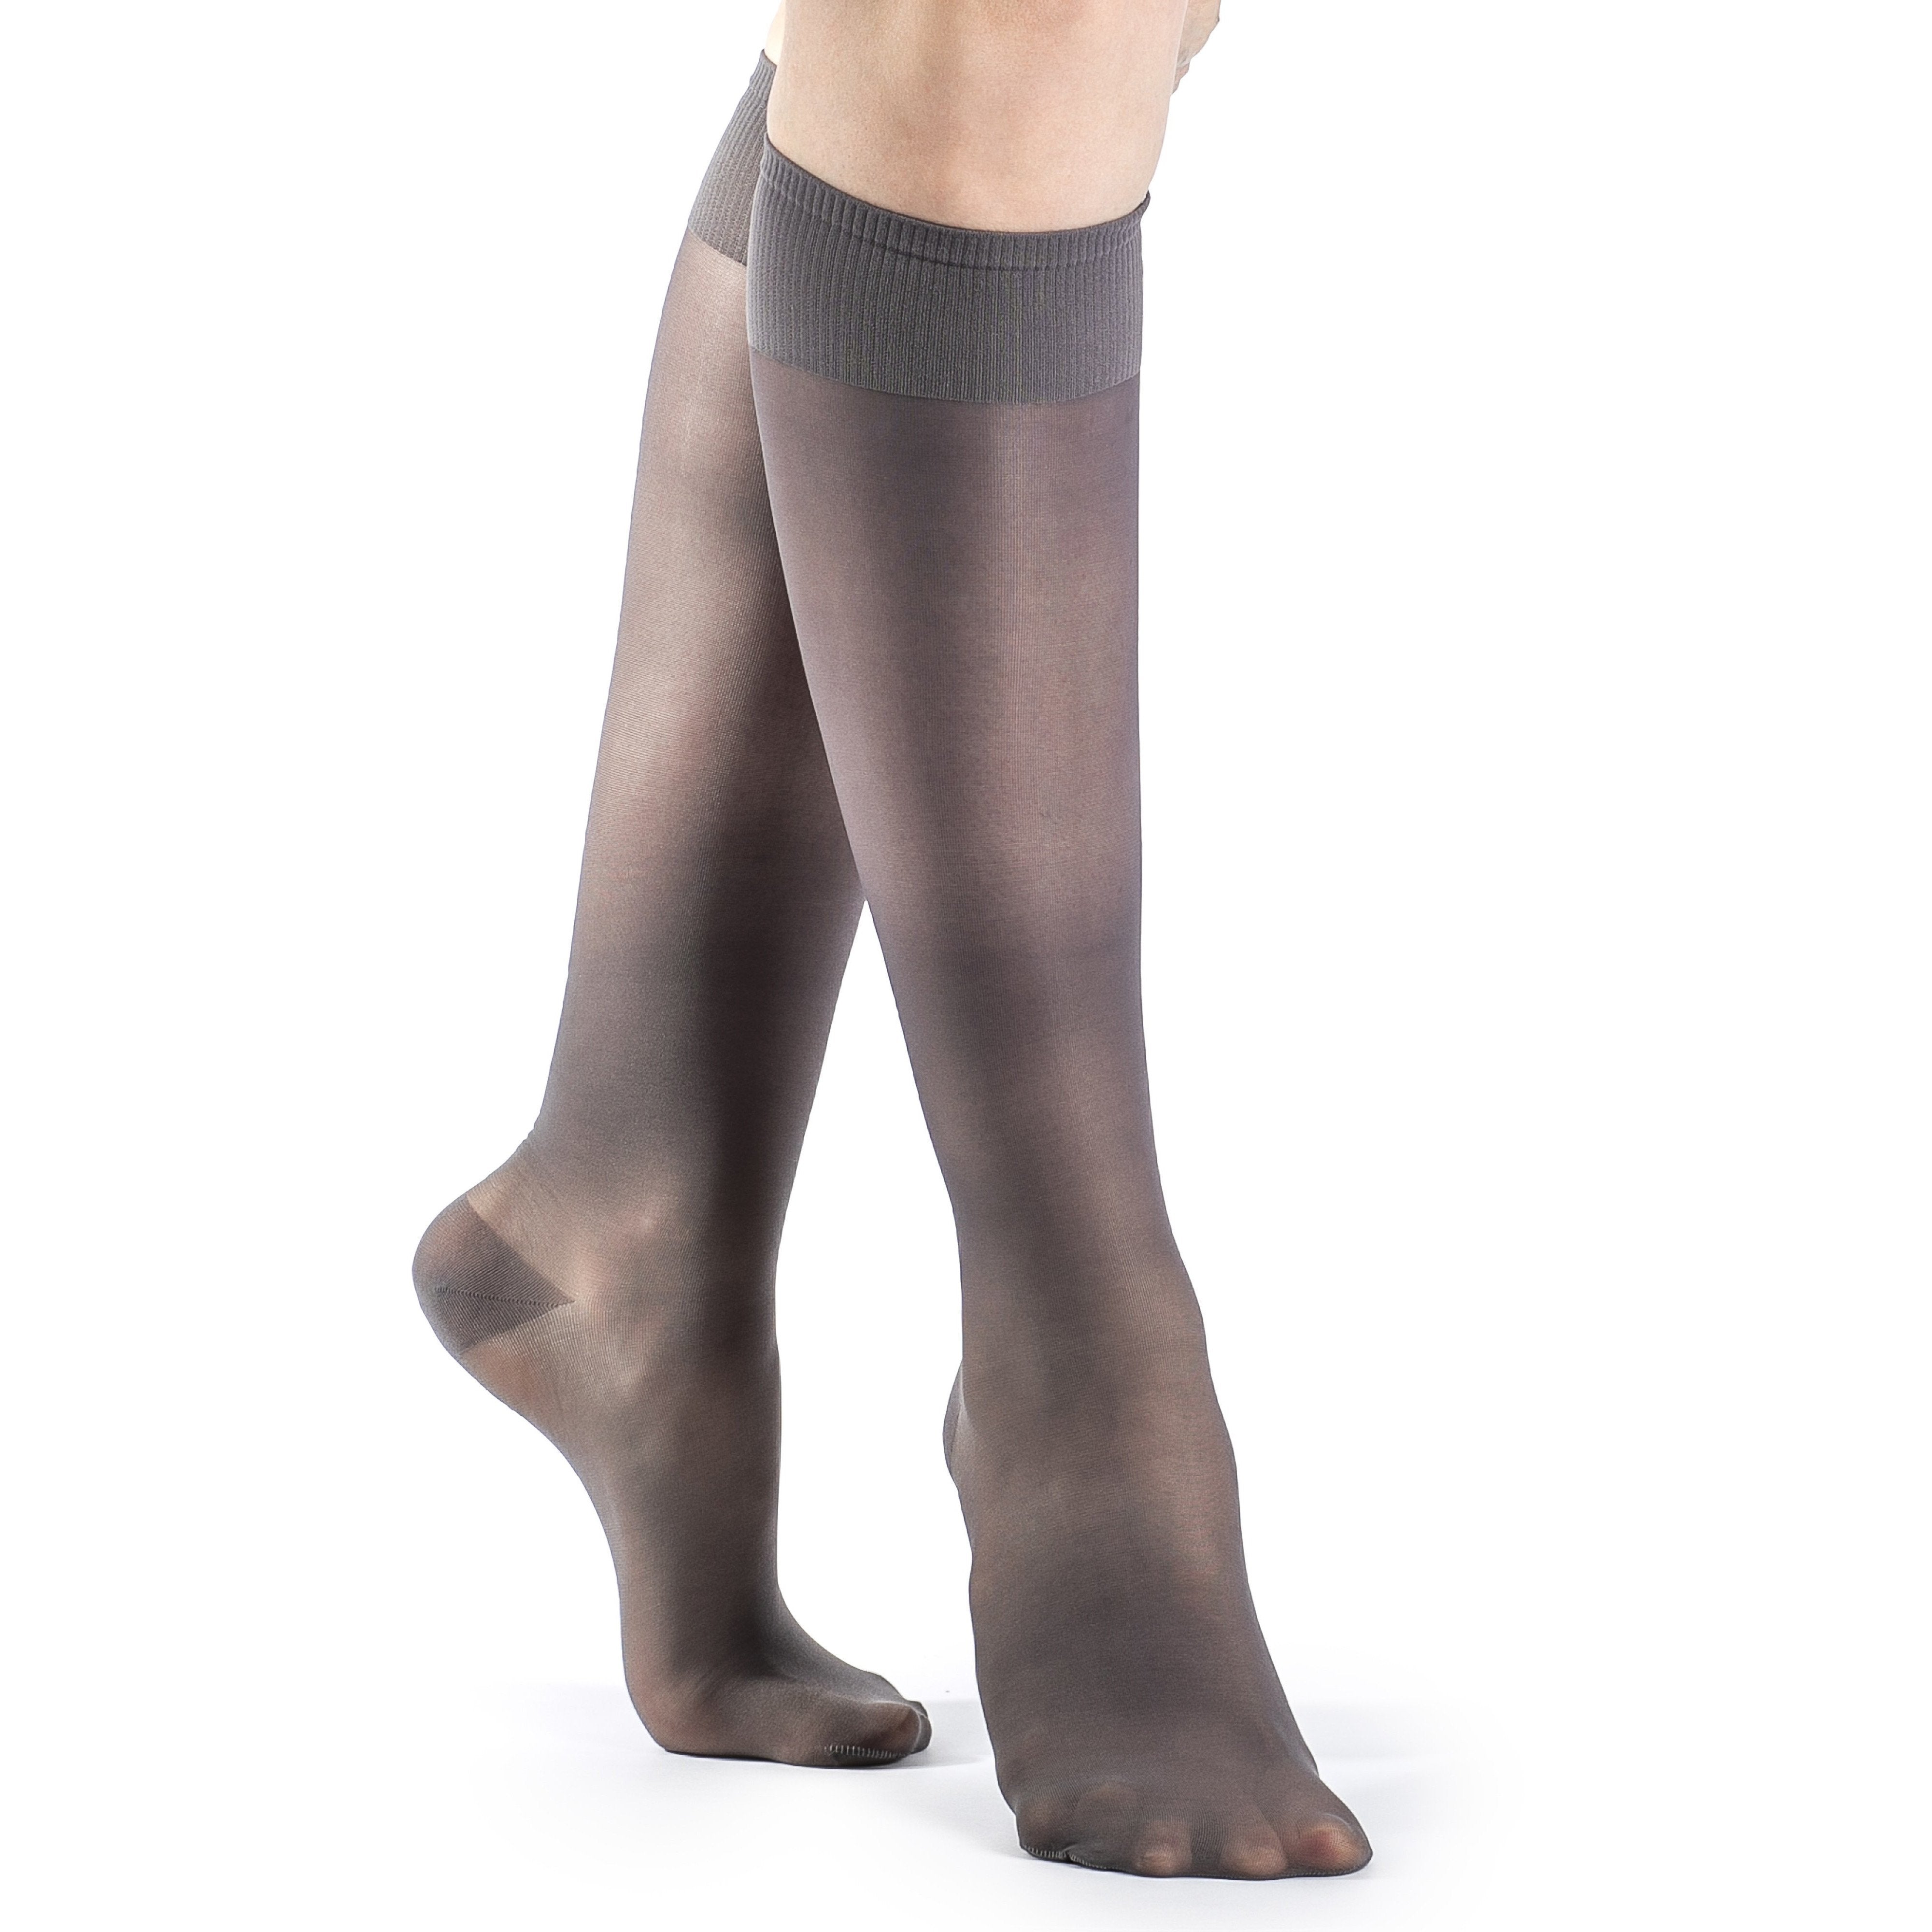 Sigvaris Active Work Wear Women's Socks - Compression Stockings